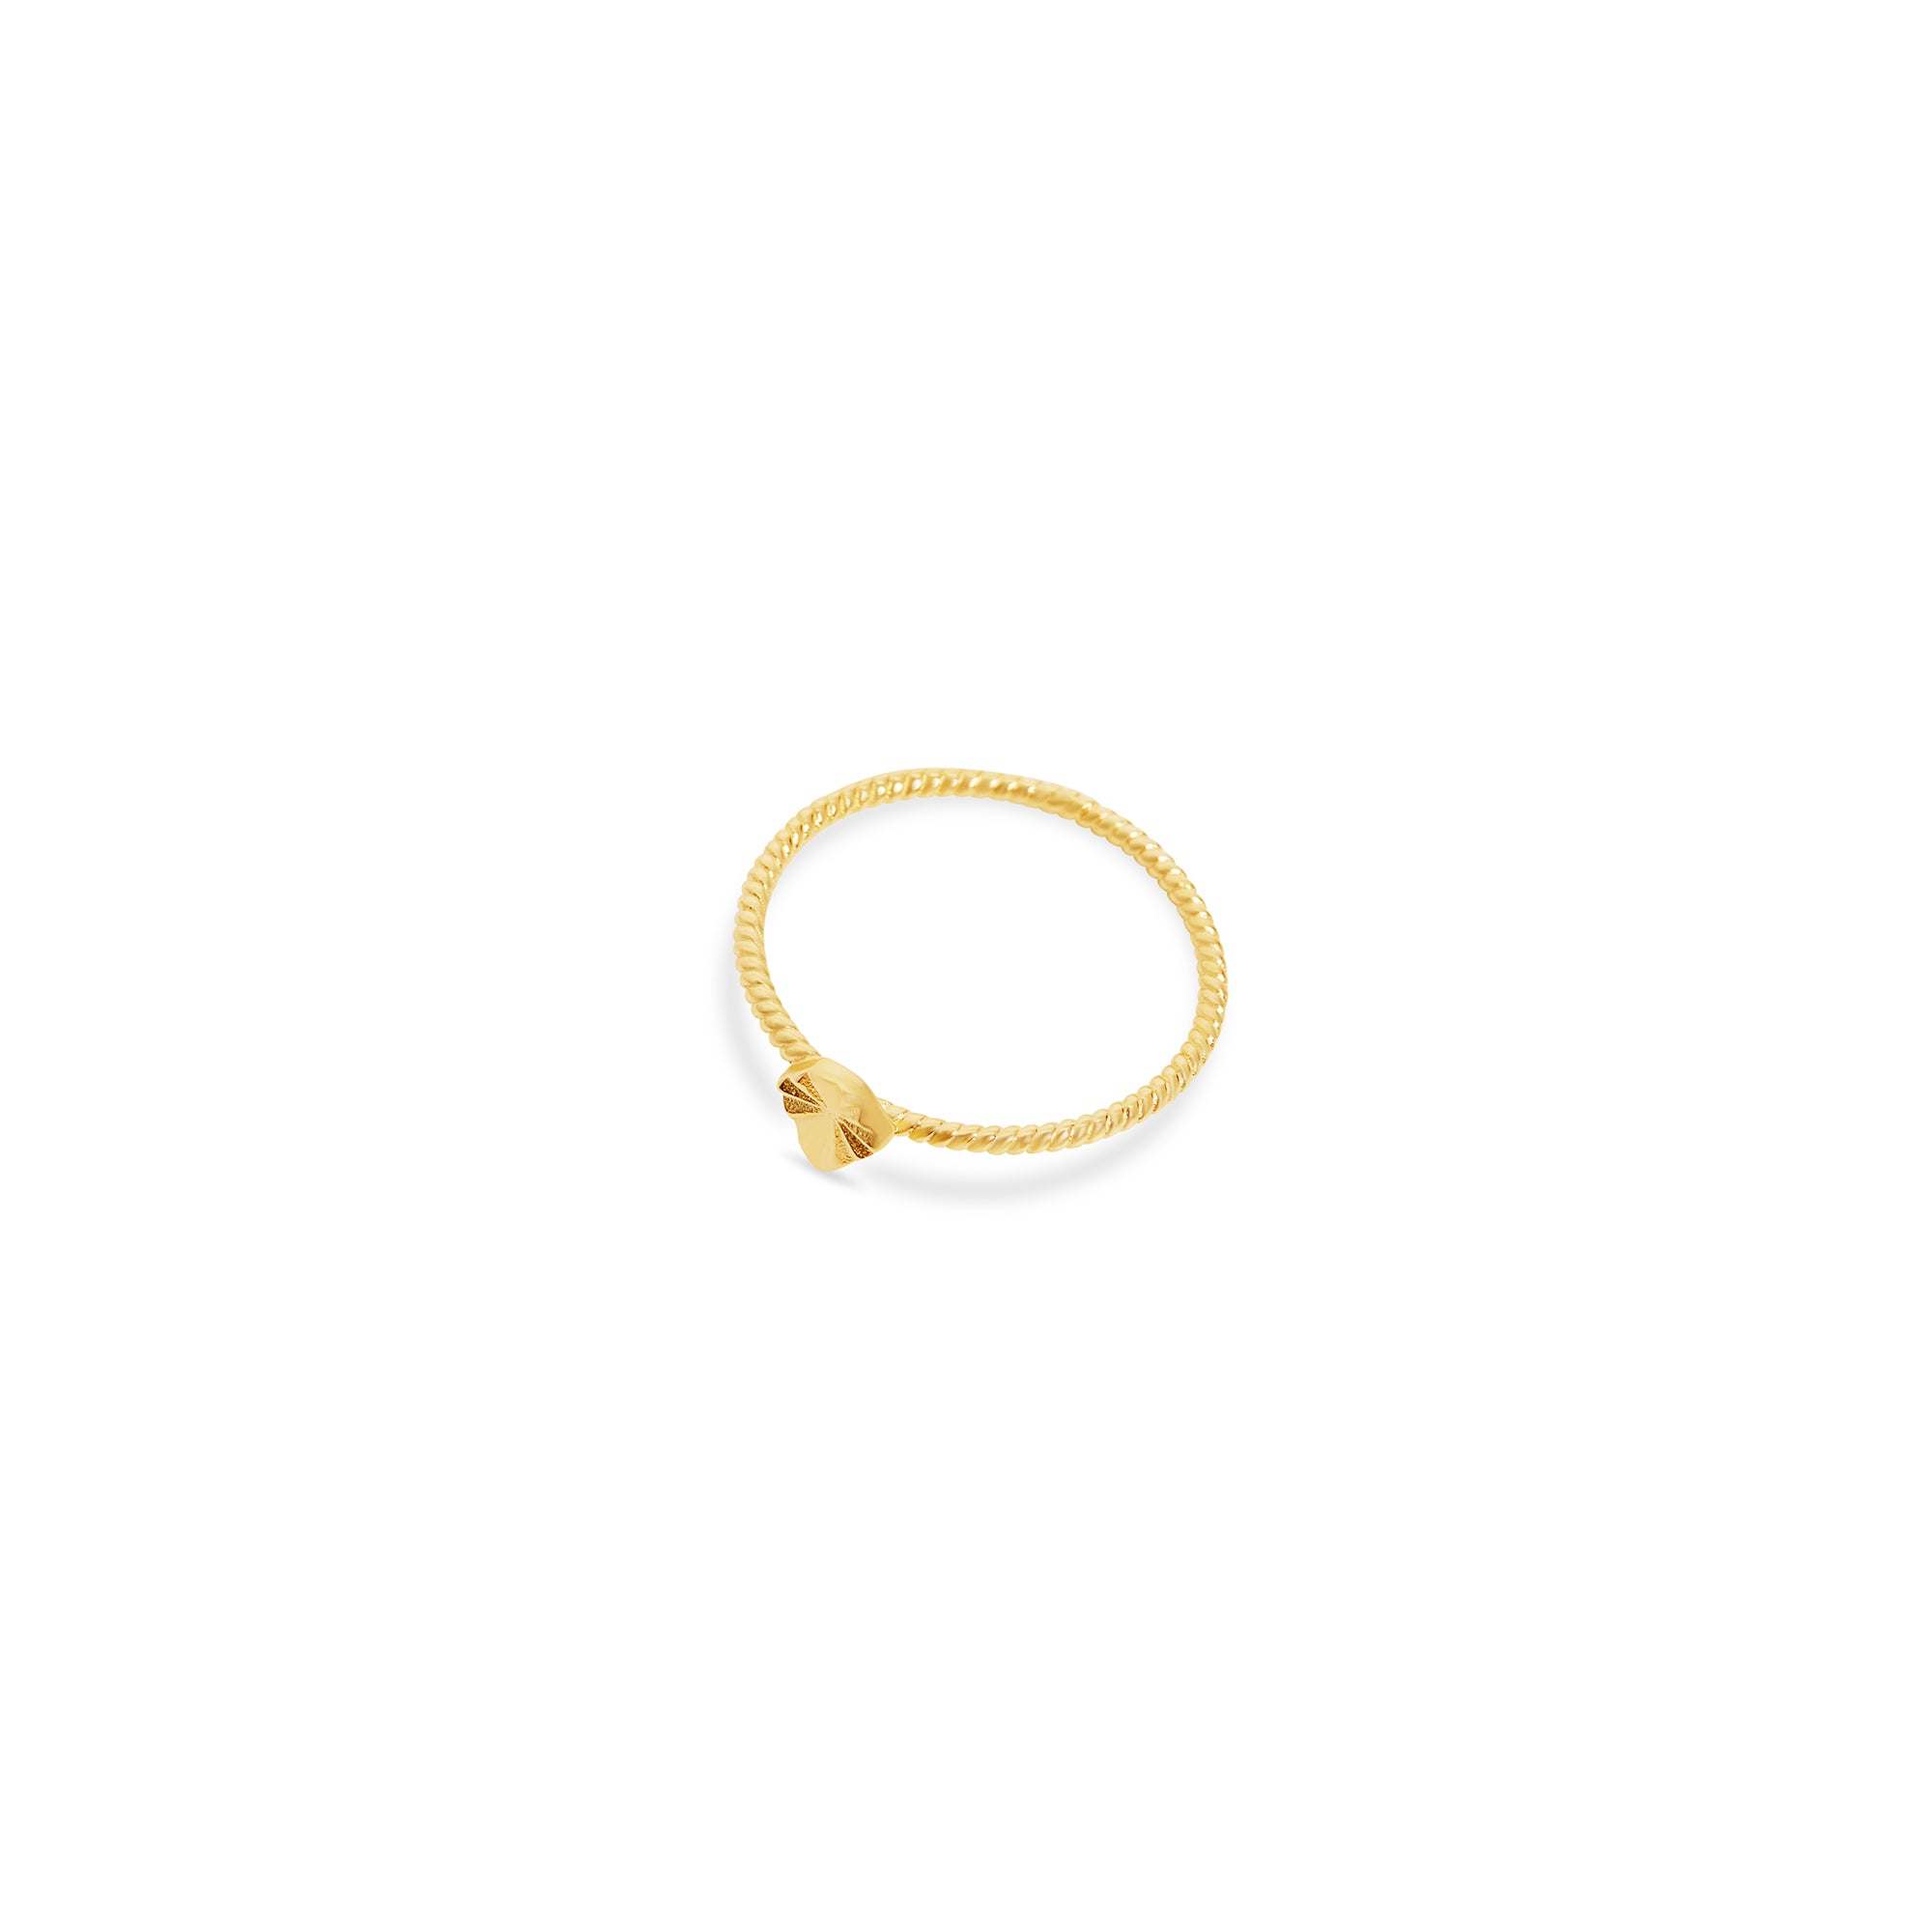 THE TALIA TEXTURED RING